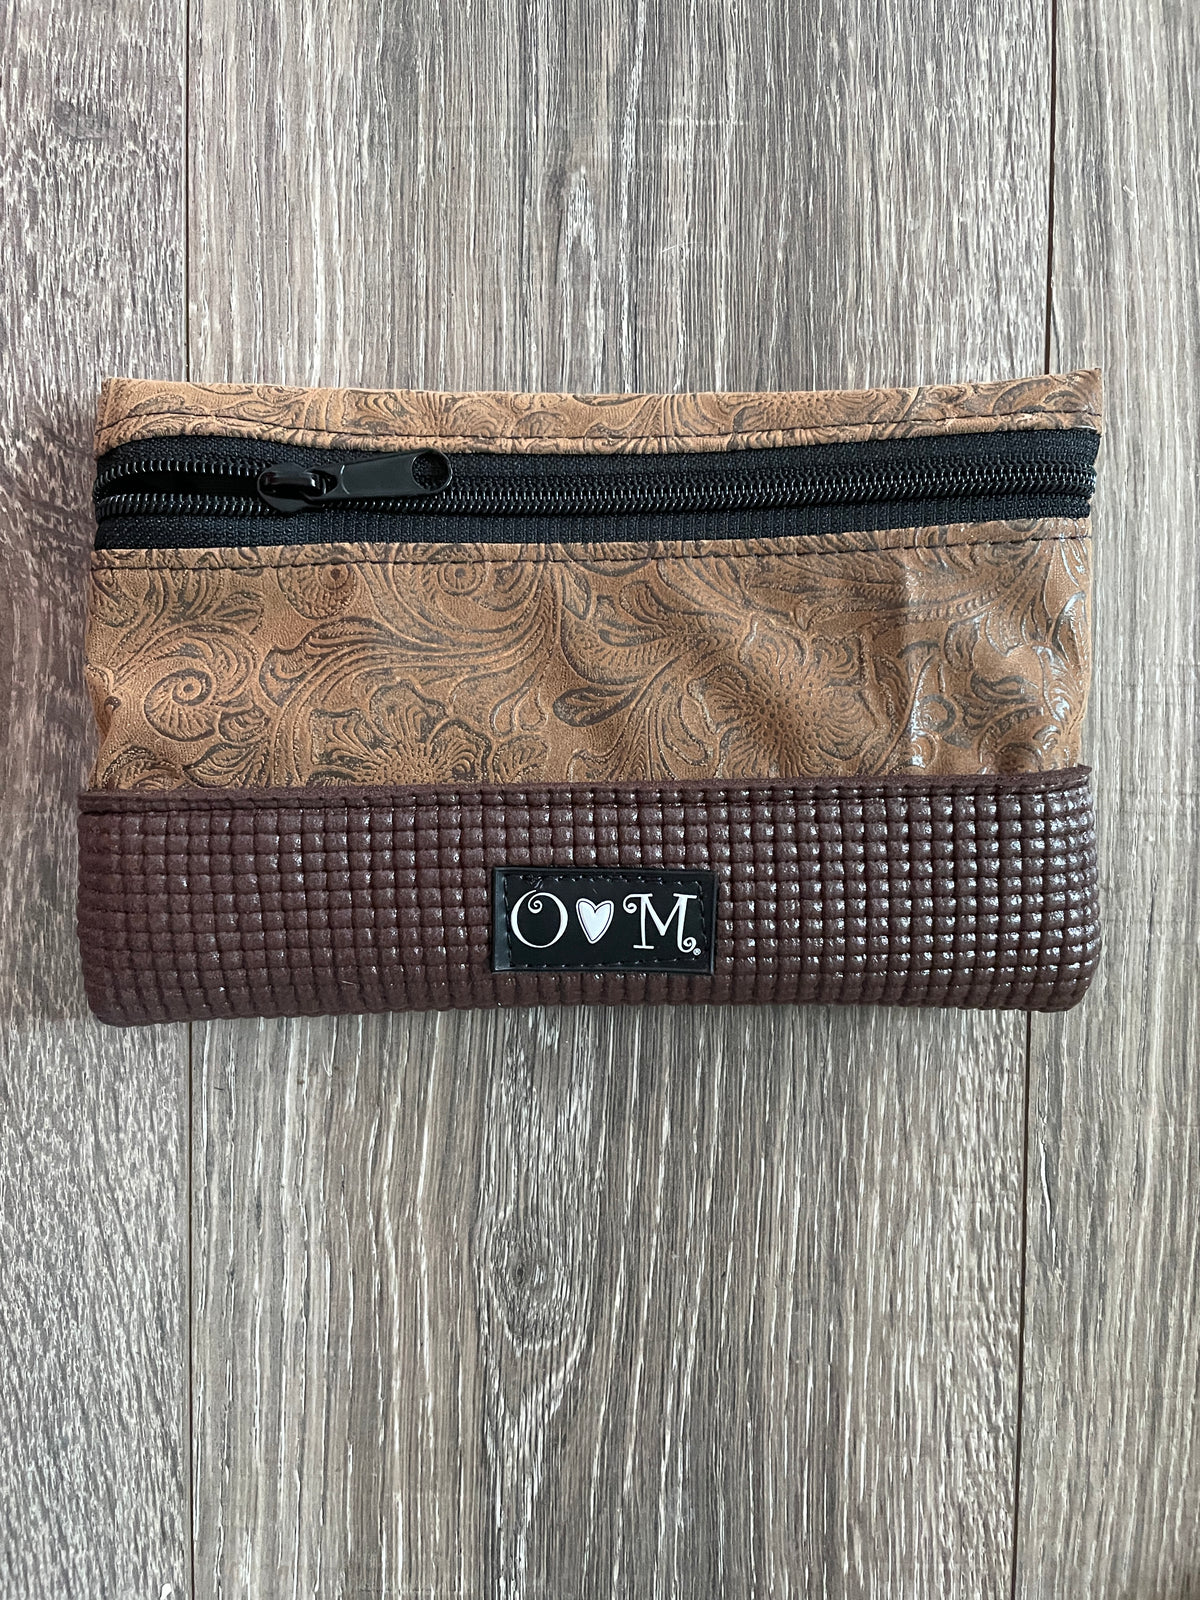 Brown Clutch Purse-Faux Western Leather Print Fabric